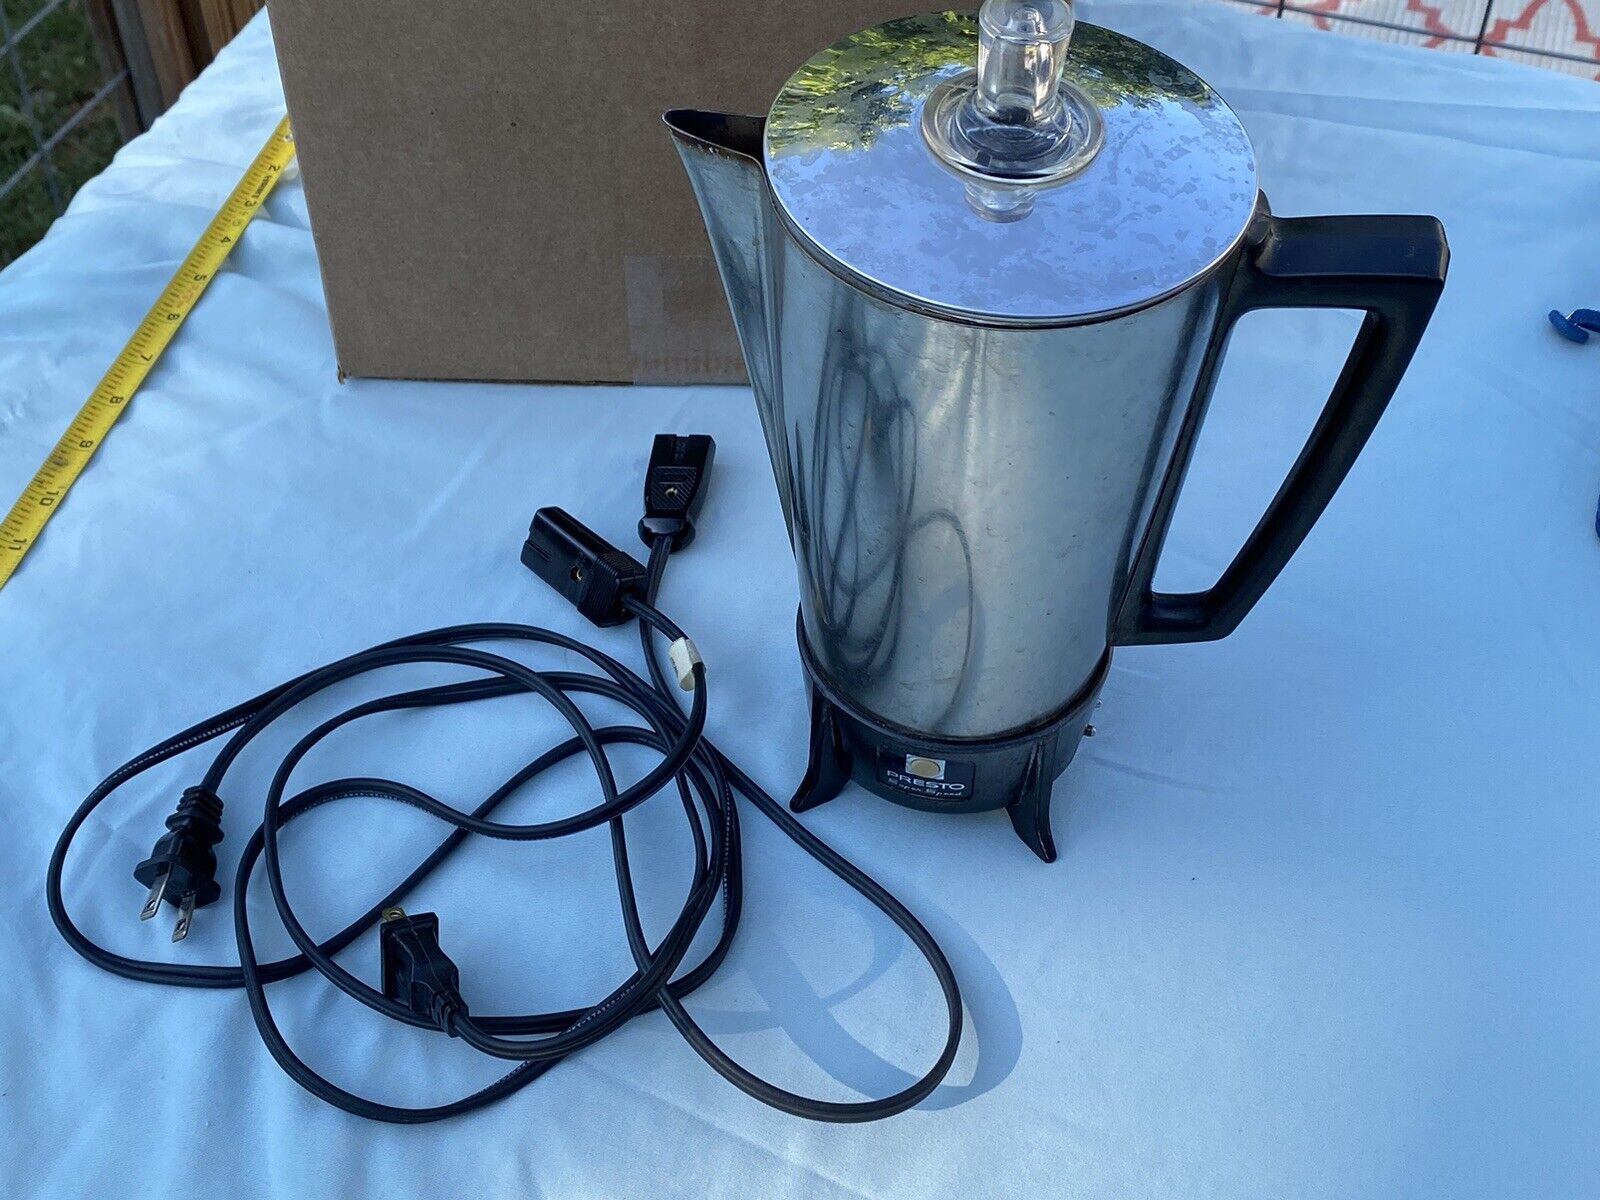 Vintage Presto Electric Percolator Coffee Pot Stainless 9 Cup PK10A - 2 cords